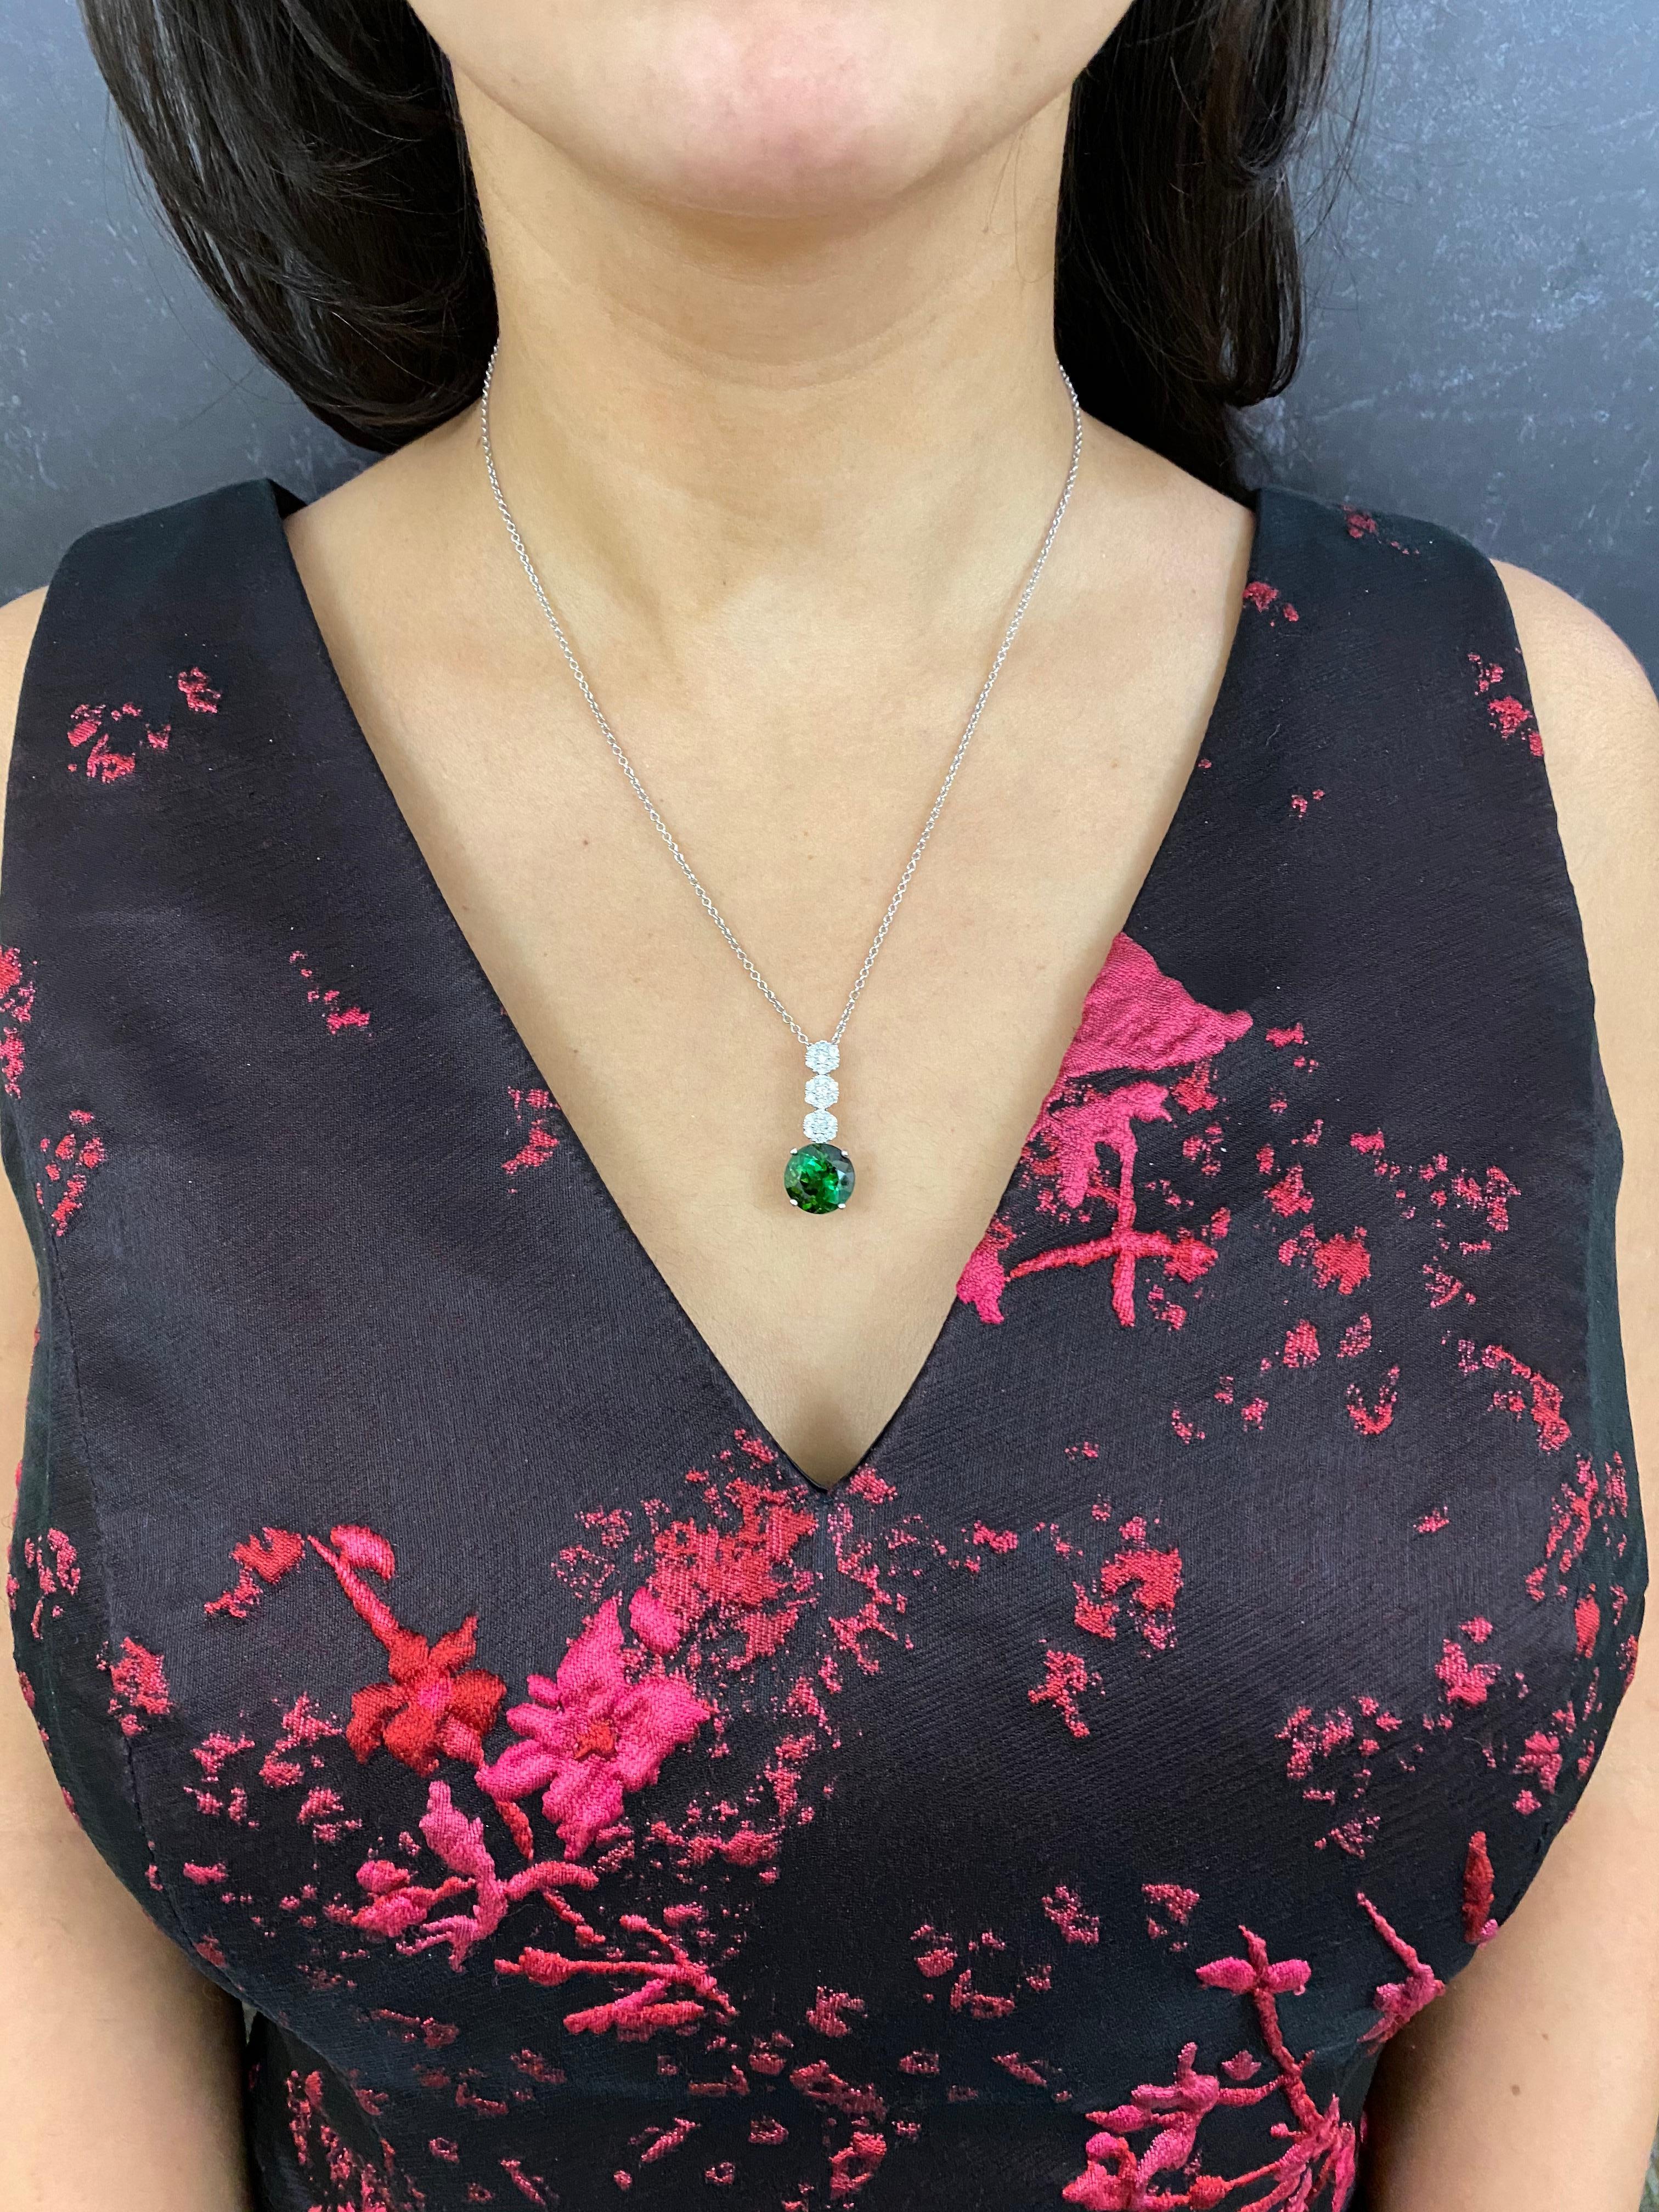 Material: 14k White Gold 
Center Stone Details: 1 Round Green Tourmaline at 5.79 Carats- Measuring 11.5 mm
Diamonds: 21 Brilliant Round White Diamonds at 0.51 Carats. SI Clarity /  H-I Color

Fine one-of-a-kind craftsmanship meets incredible quality